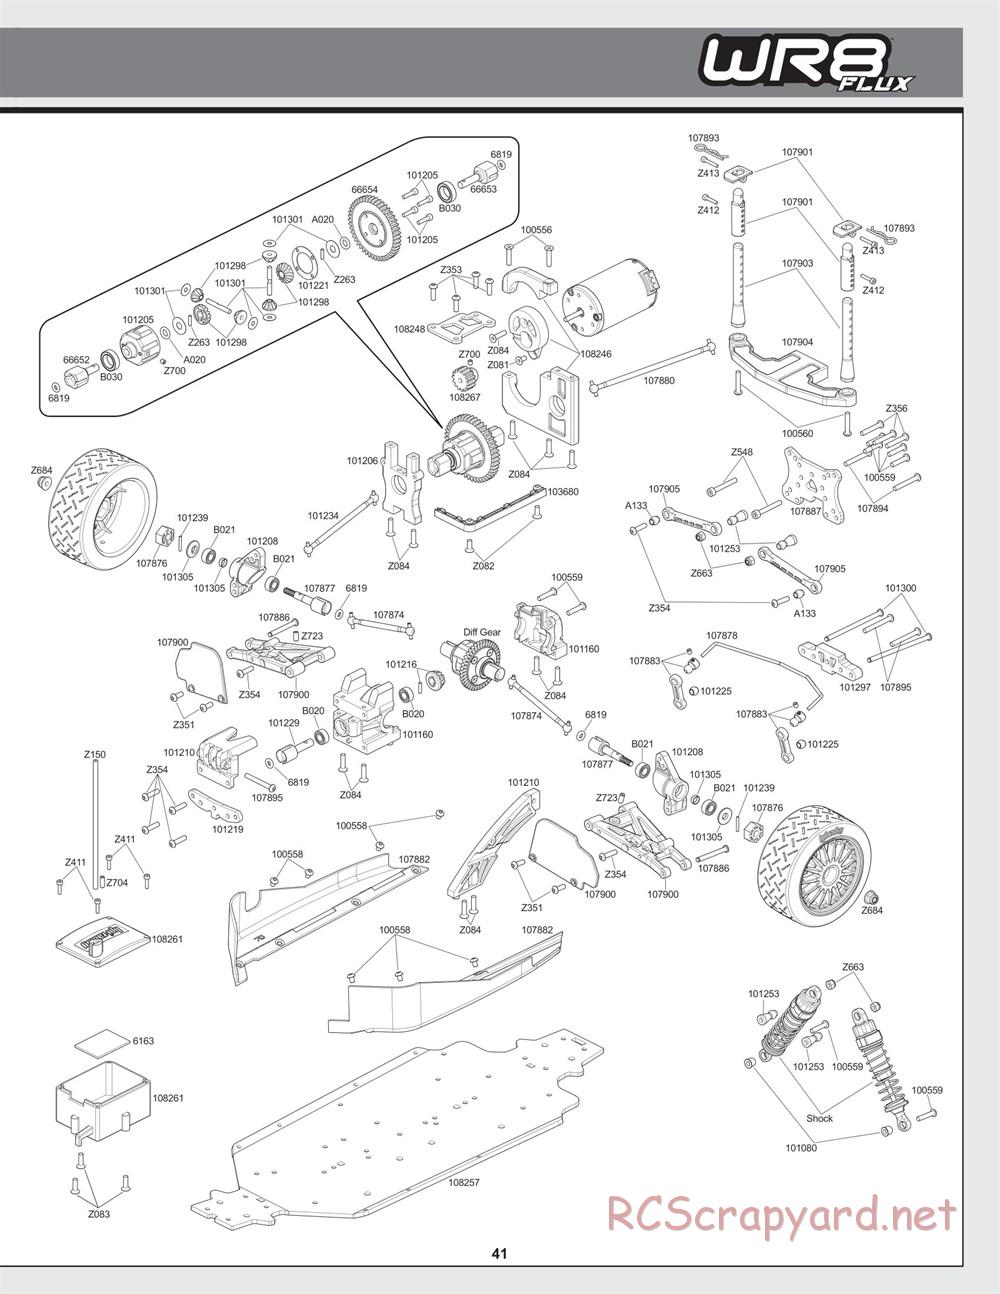 HPI - WR8 Flux Rally - Exploded View - Page 41